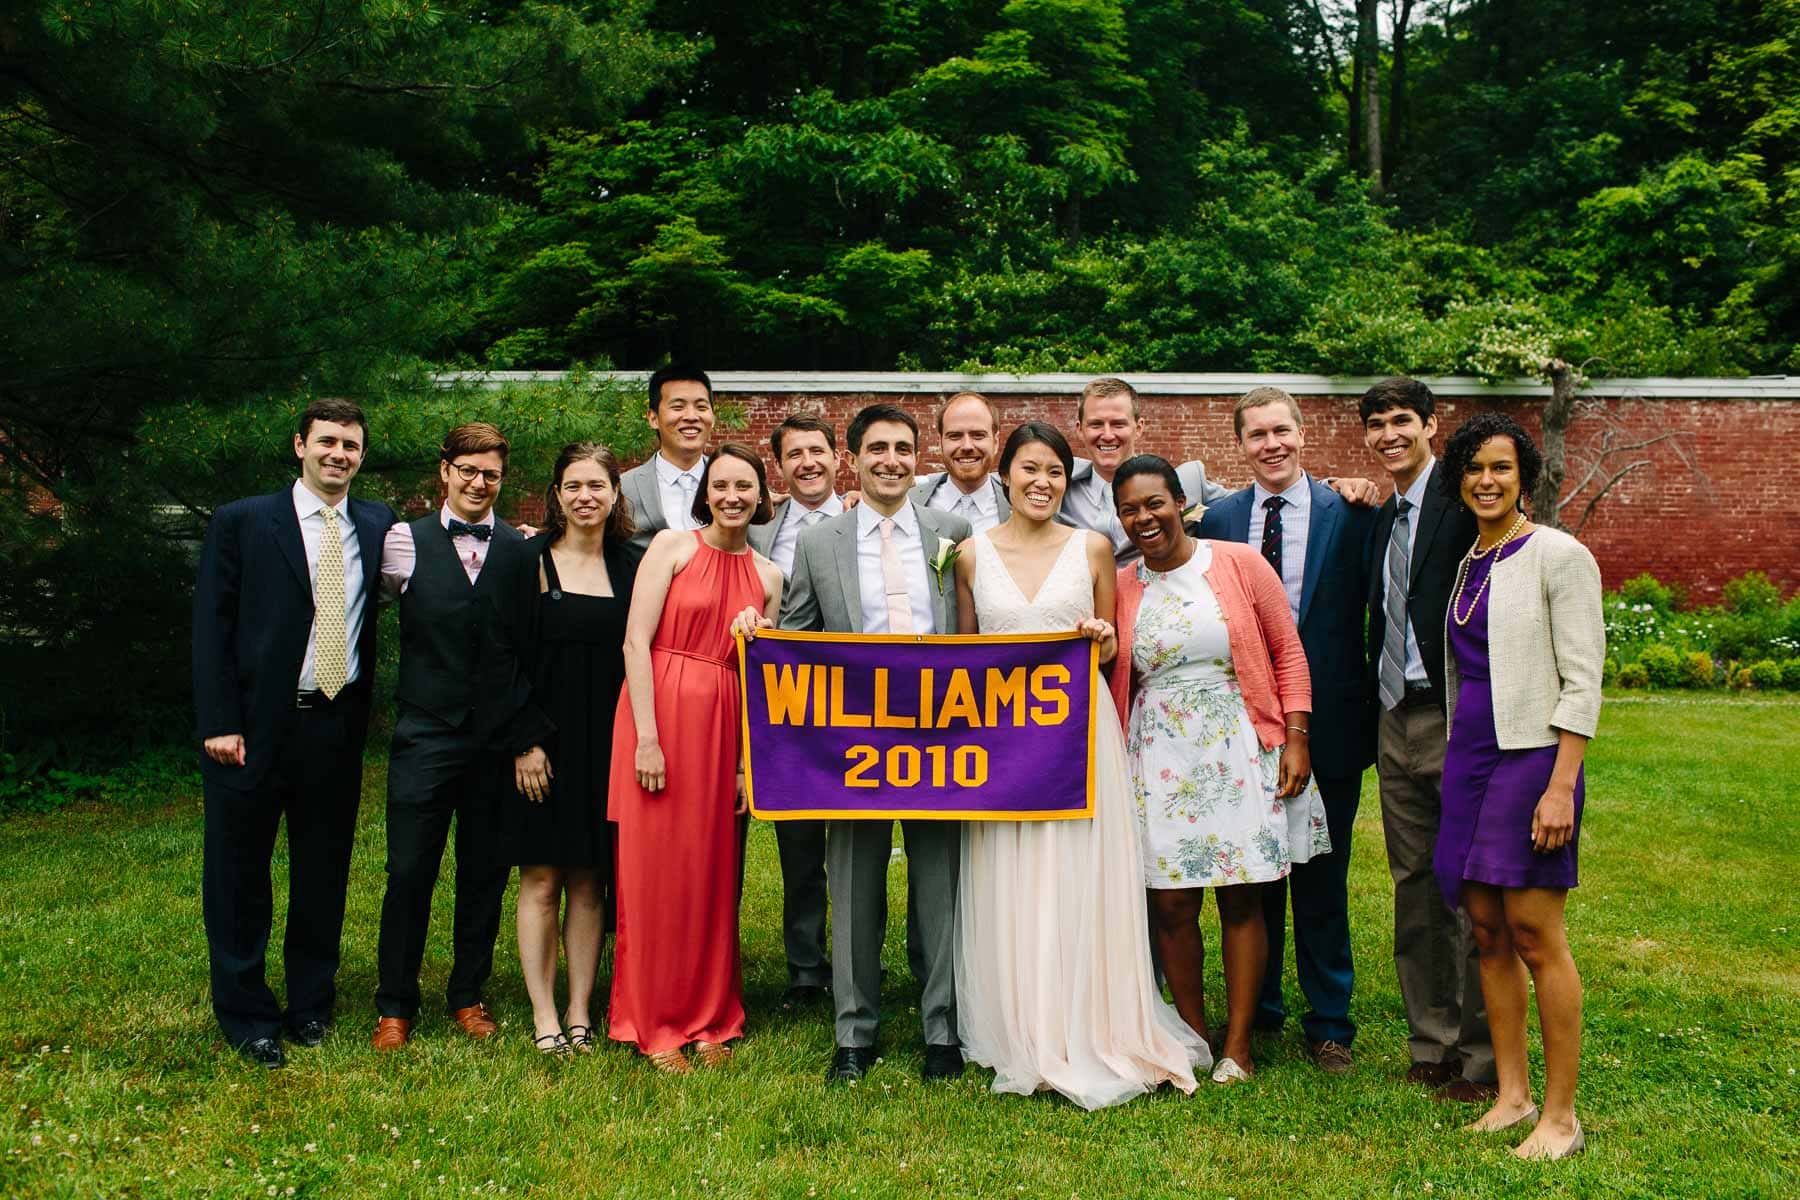 Williams College group photo at wedding 